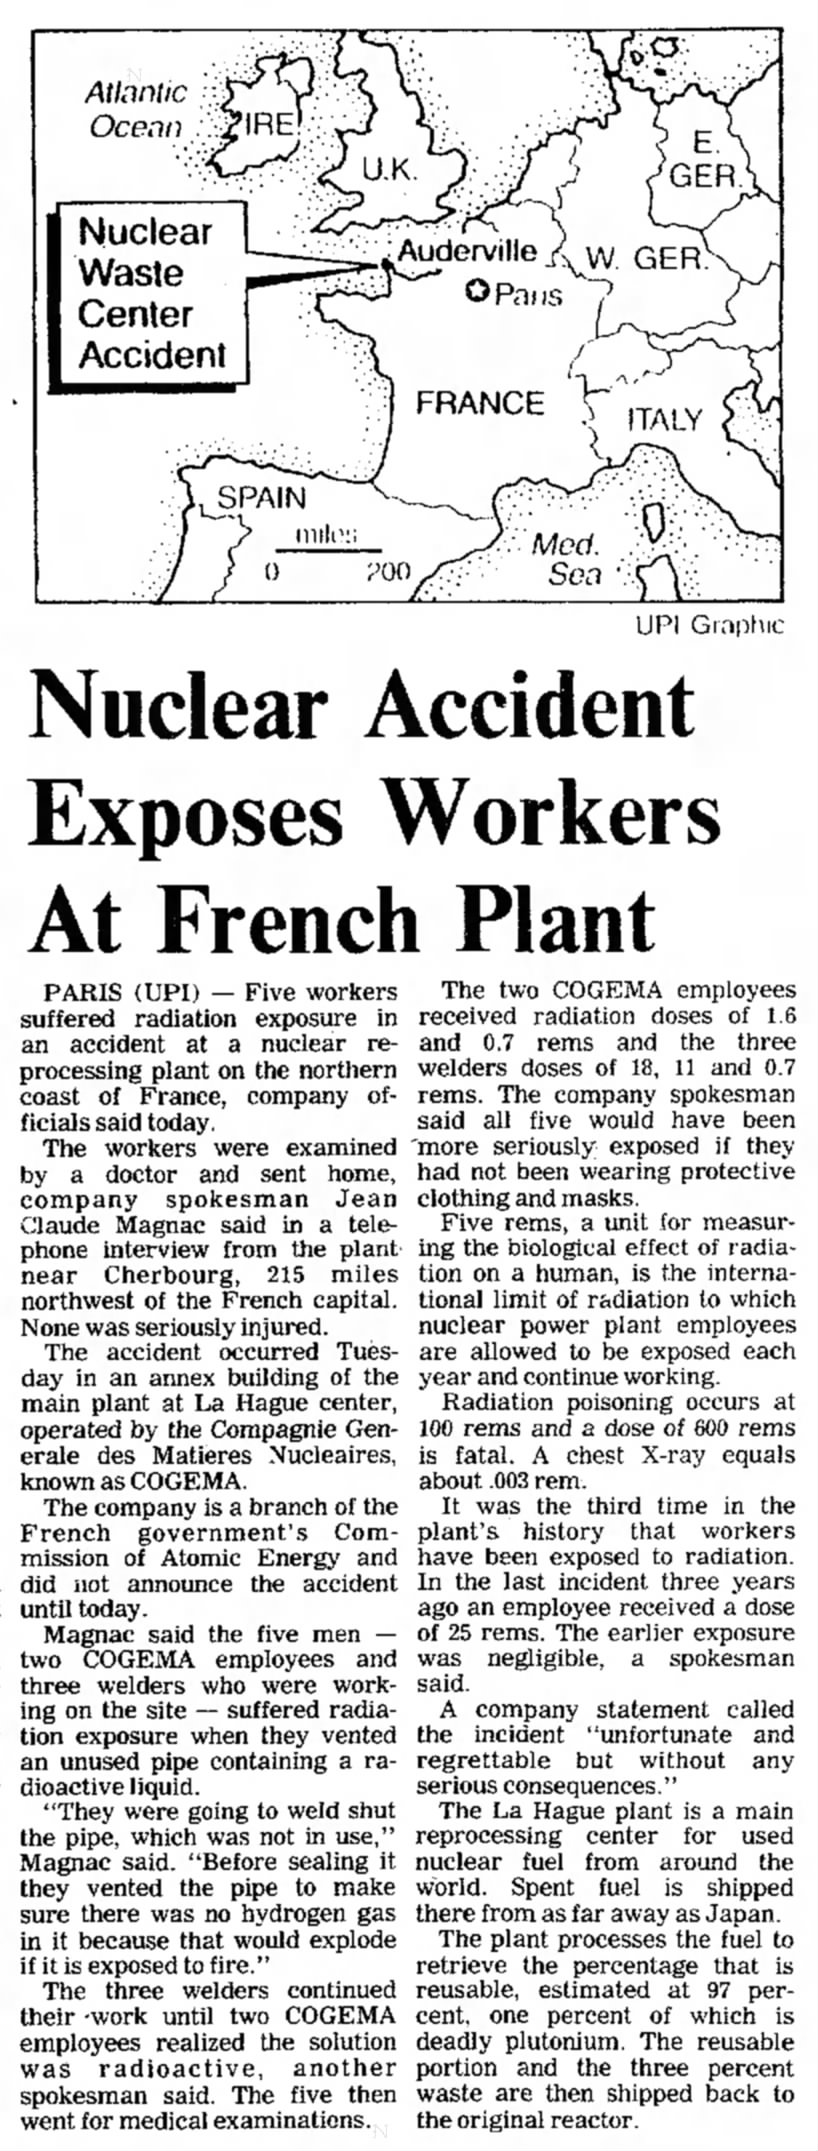 Nuclear accident exposes workers at French fuel reprocessing plant, La Hague (1986)